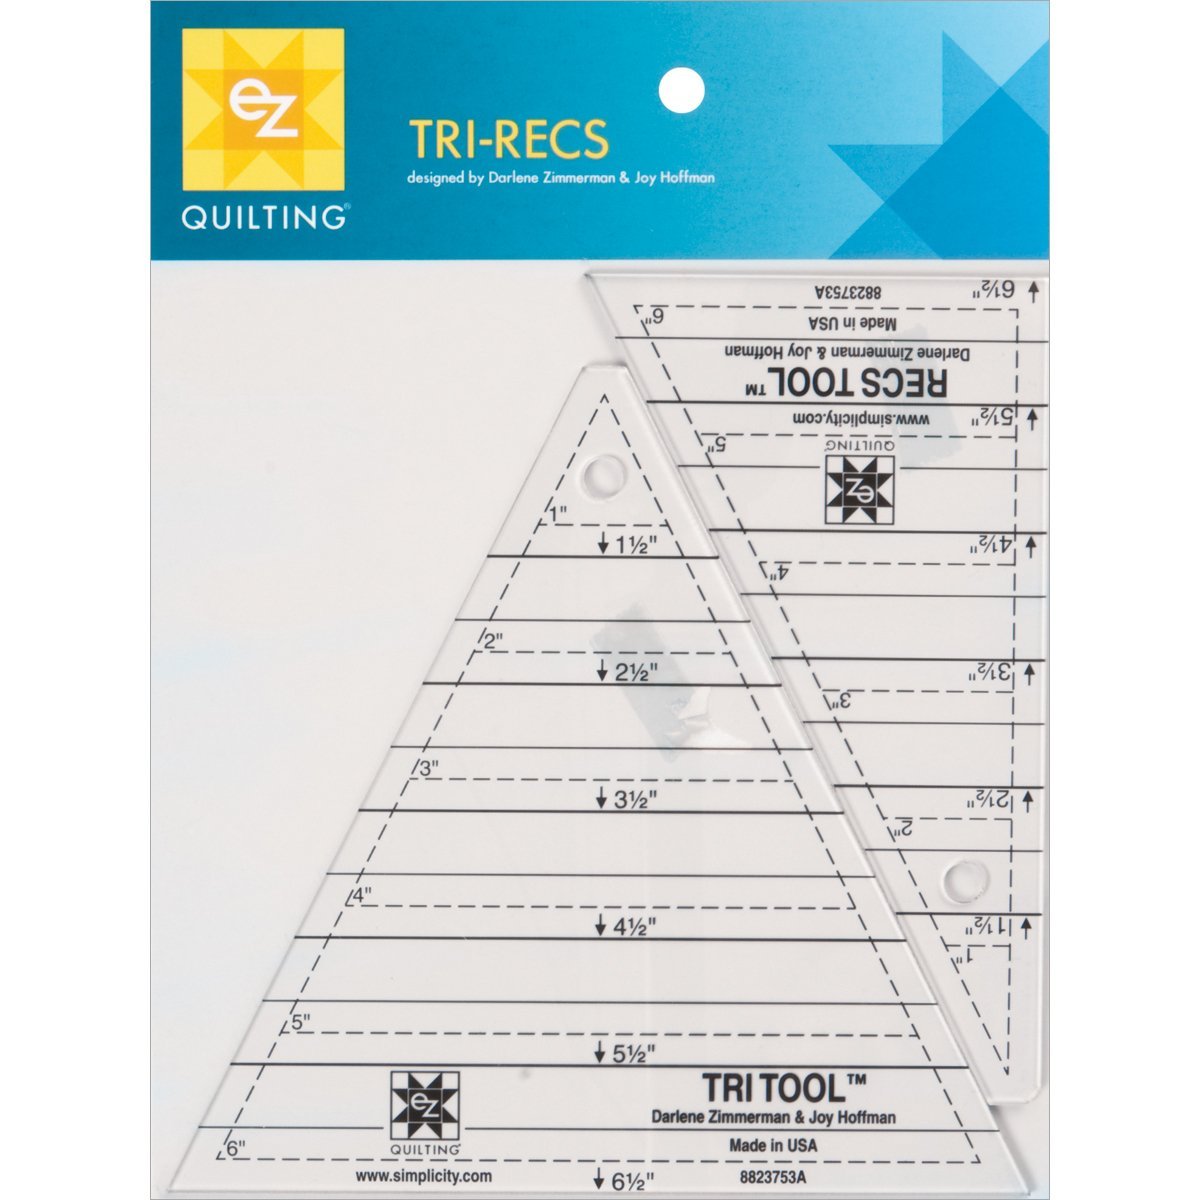 Patchwork & Quilting Ruler - Tri Recs Triangle by Darlene Zimmerman and Joy Hoffmann for eZ Quilting 